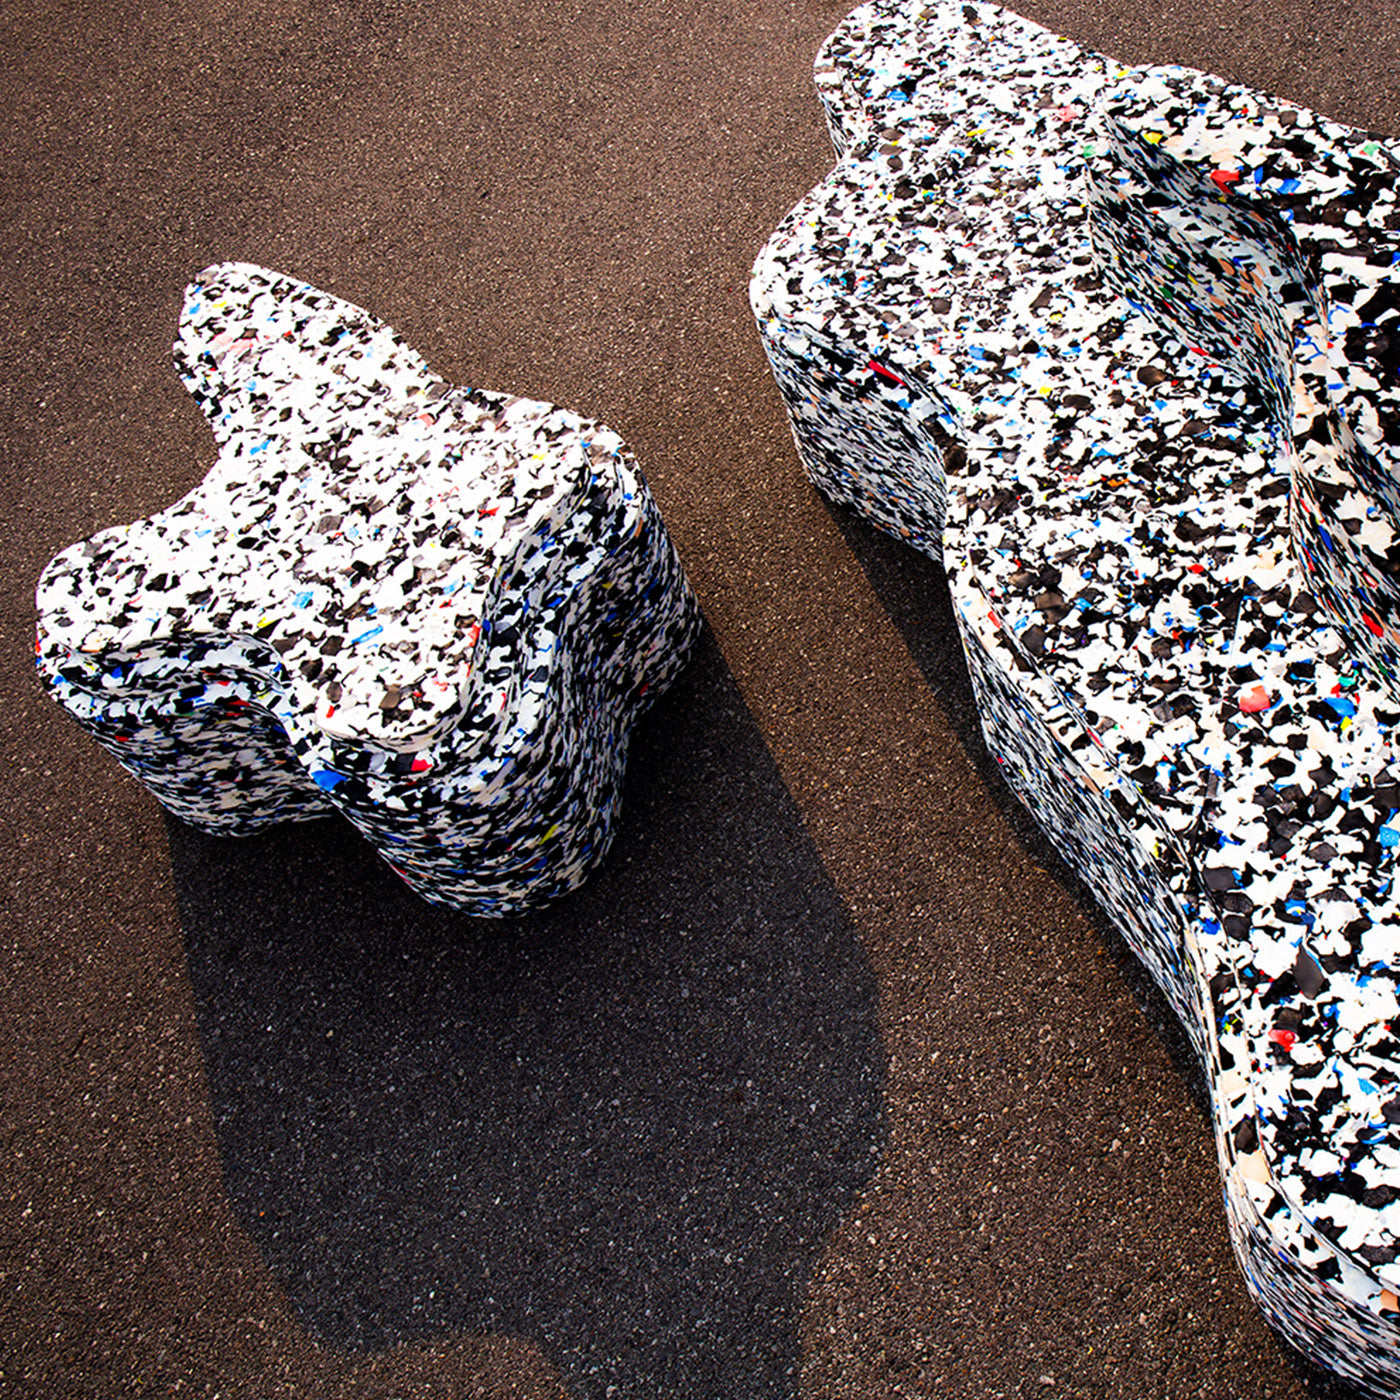 Non-Stop Materia Recycled Island Sofa By Clemence Seilles - Alternative view 2